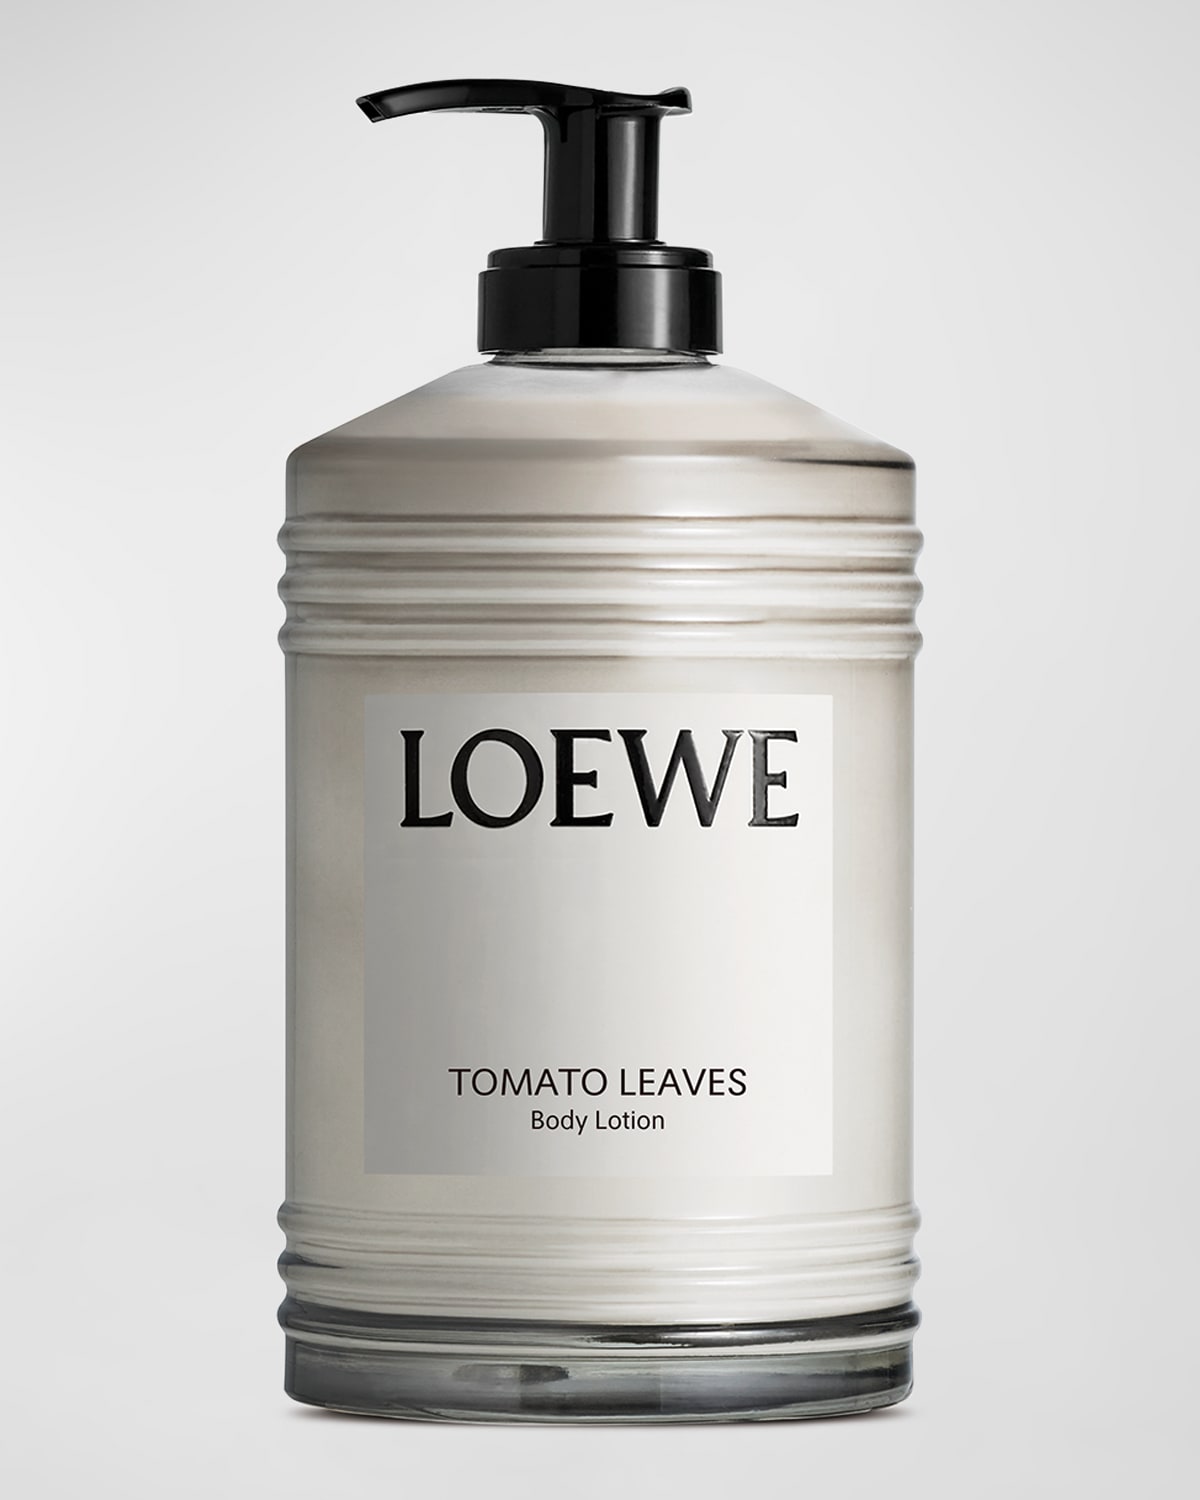 Loewe Tomato Leaves Body Lotion, 12 Oz. In White